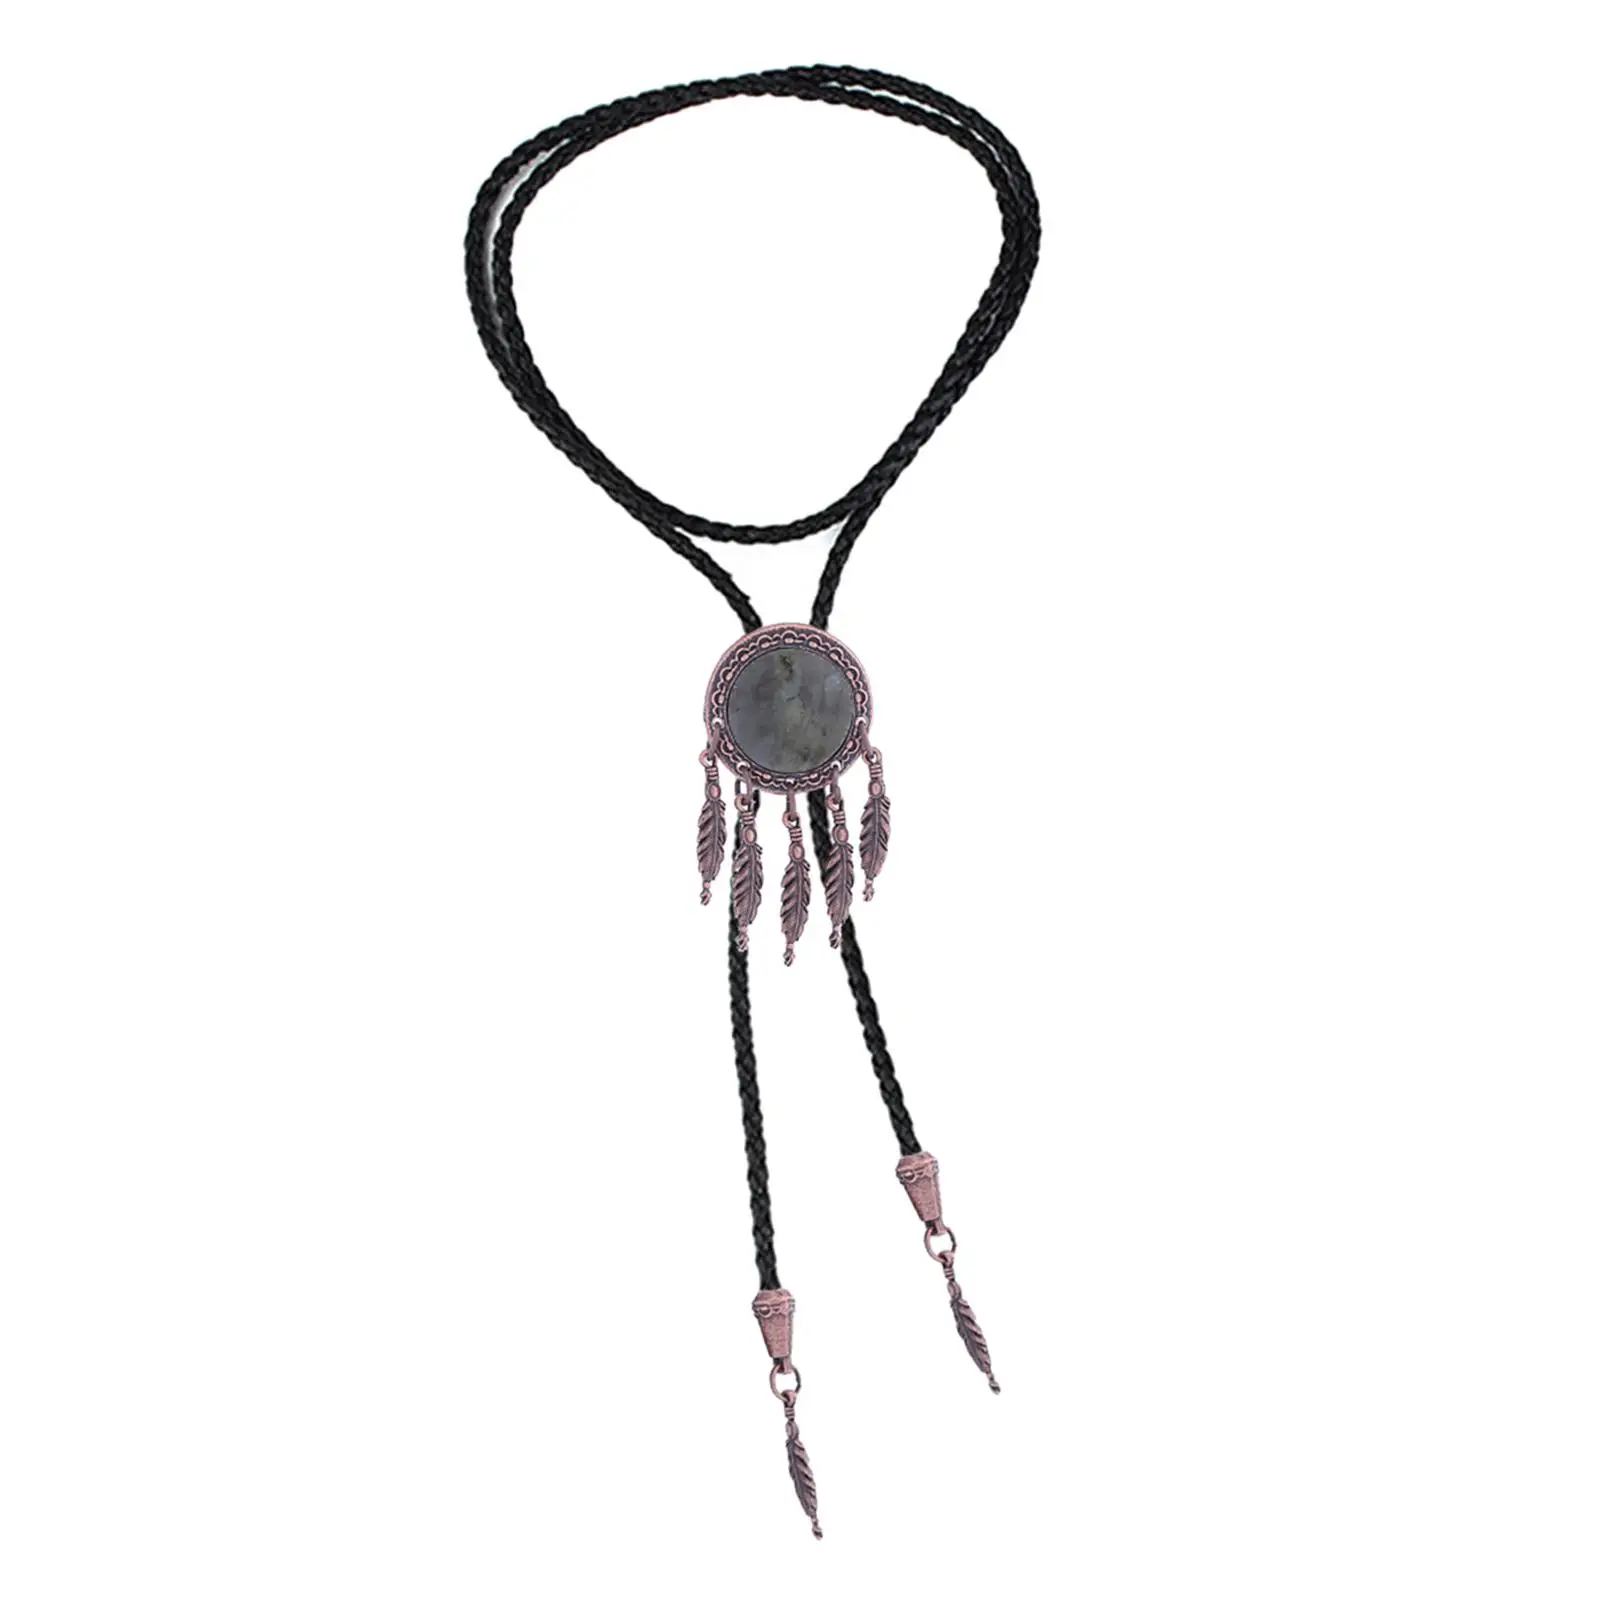 Retro Bolo Tie PU Leather Rope Adjustable Tassels Pendant Costume Necktie Necklace for Anniversary Men Women Party Cosplay Gifts